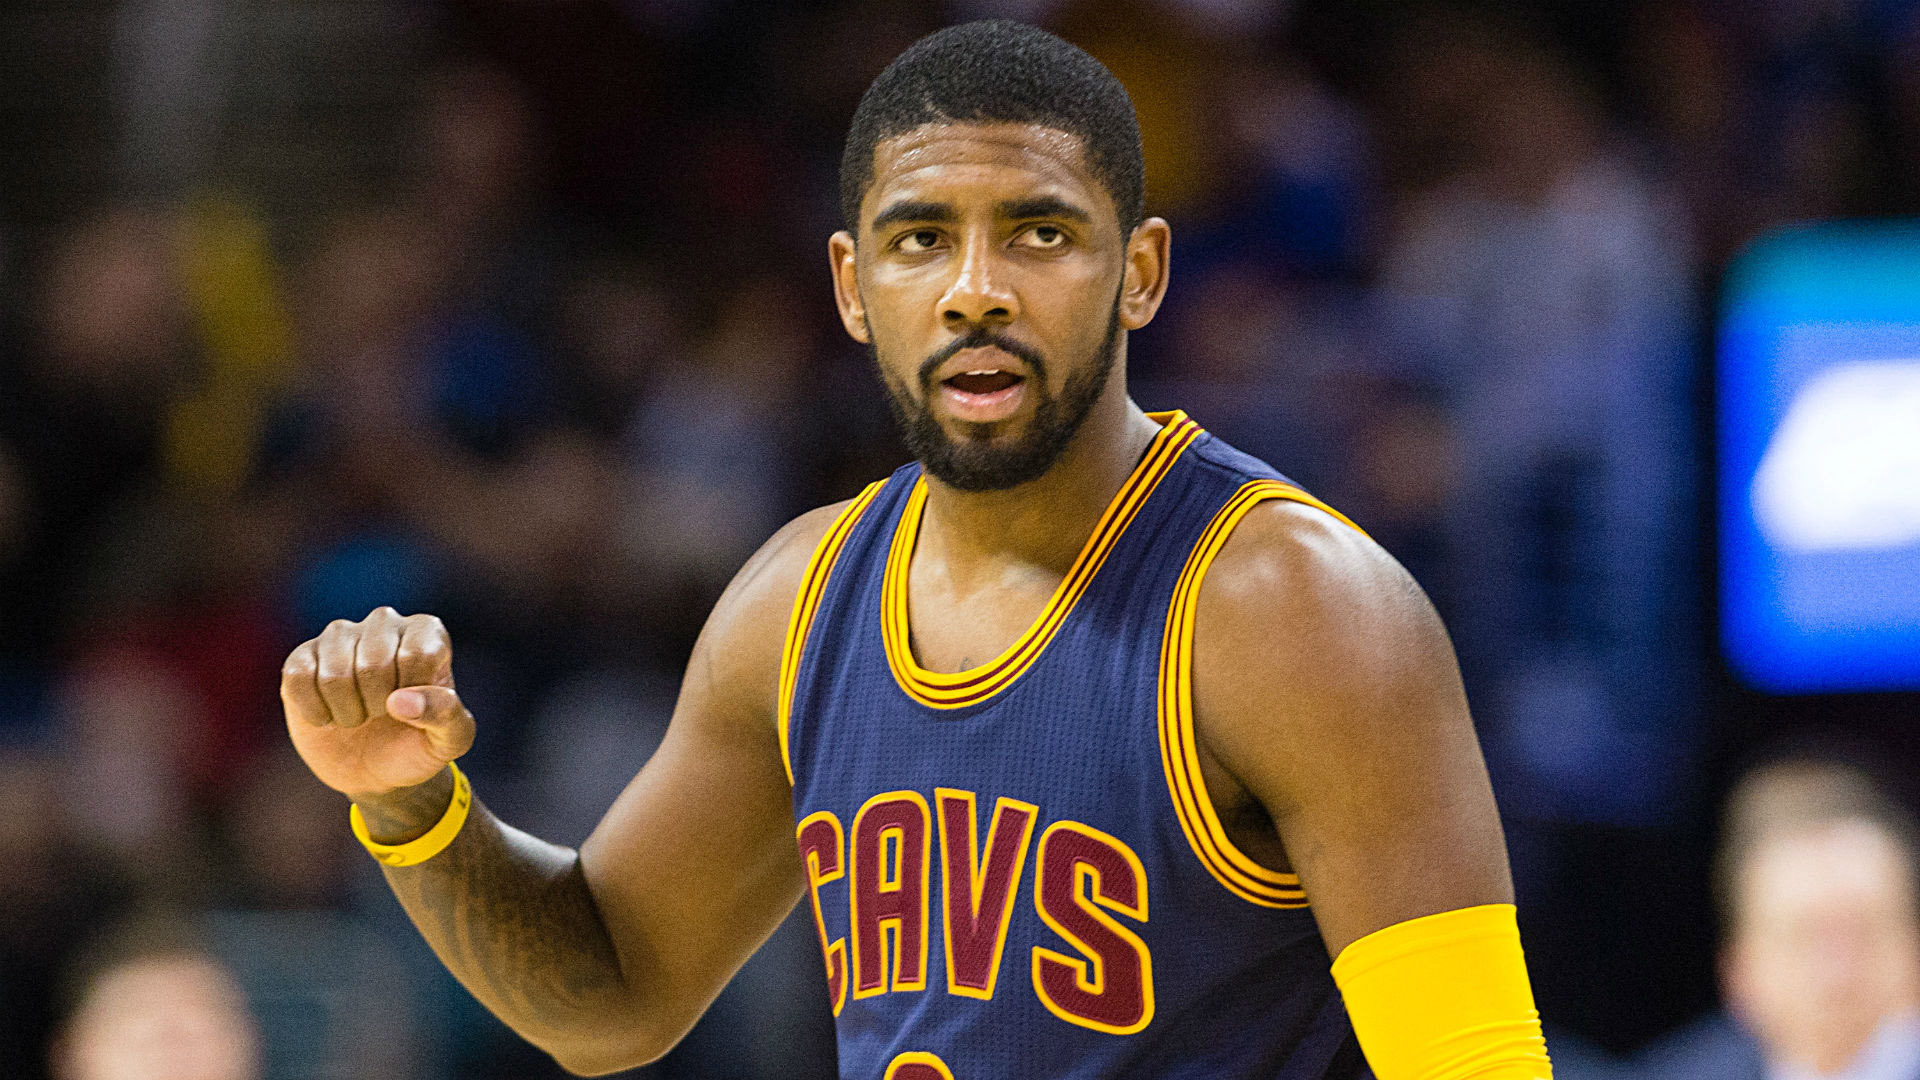 Kyrie Irving - Kyrie Irving Happy Birthday - HD Wallpaper 